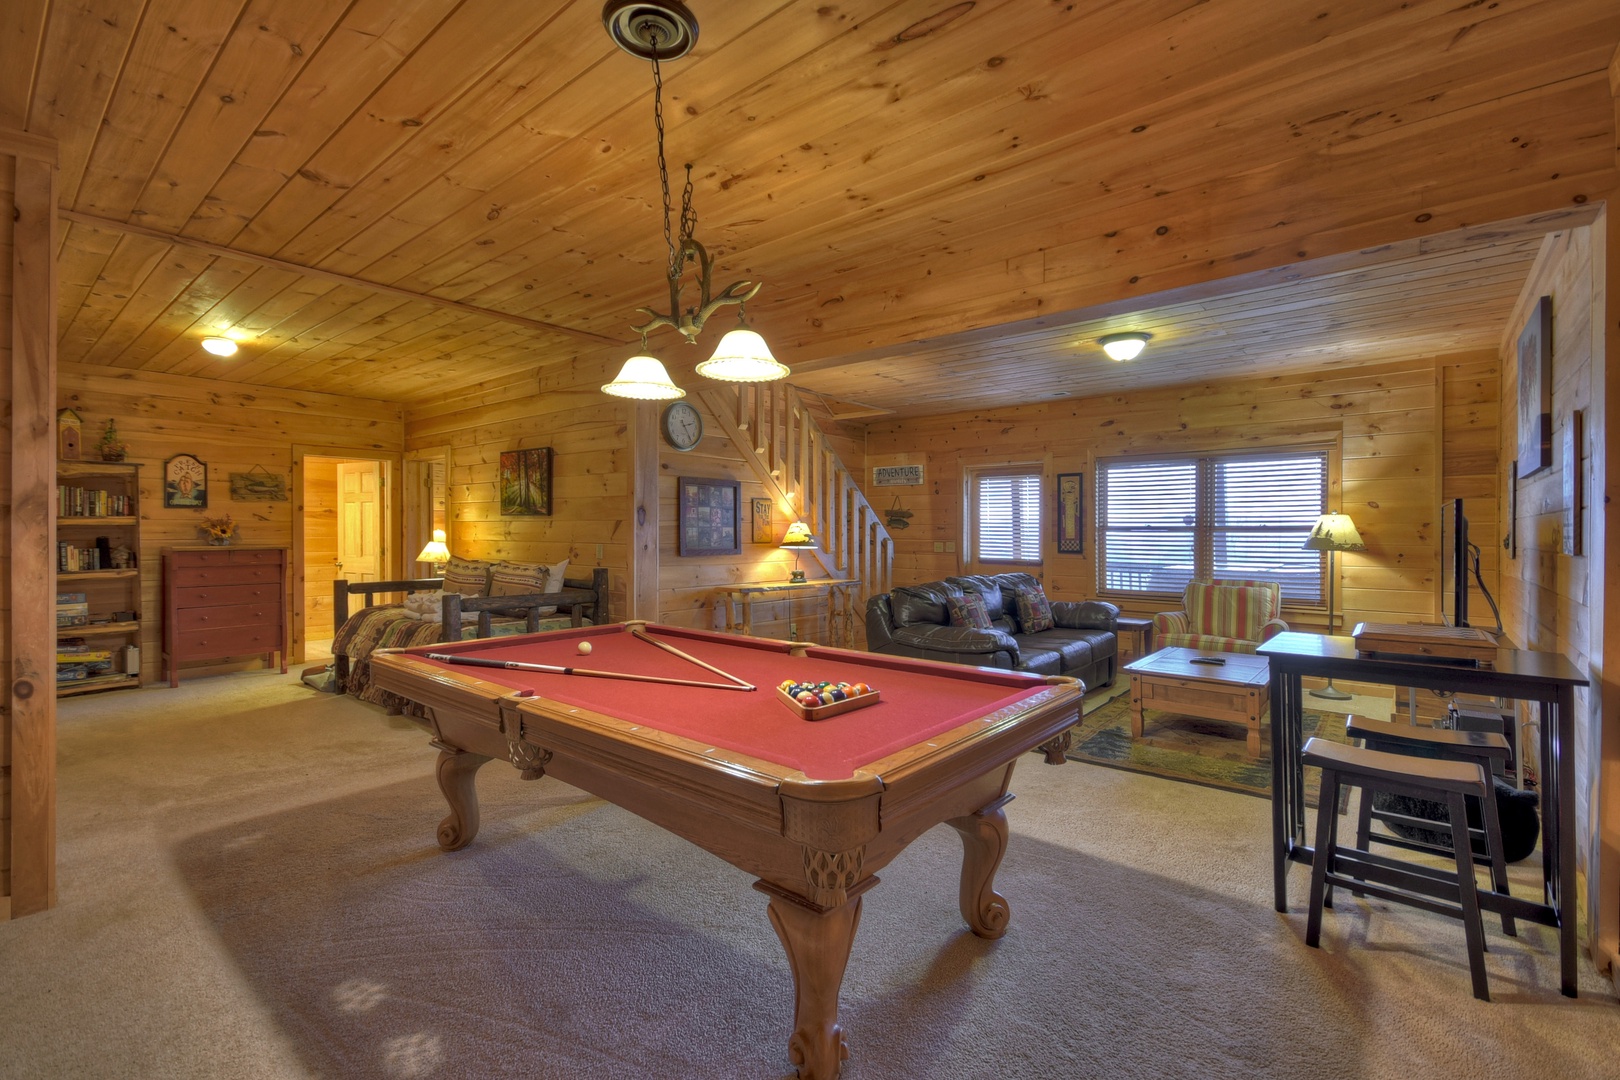 Amazing View- Pool table in the lower level den area